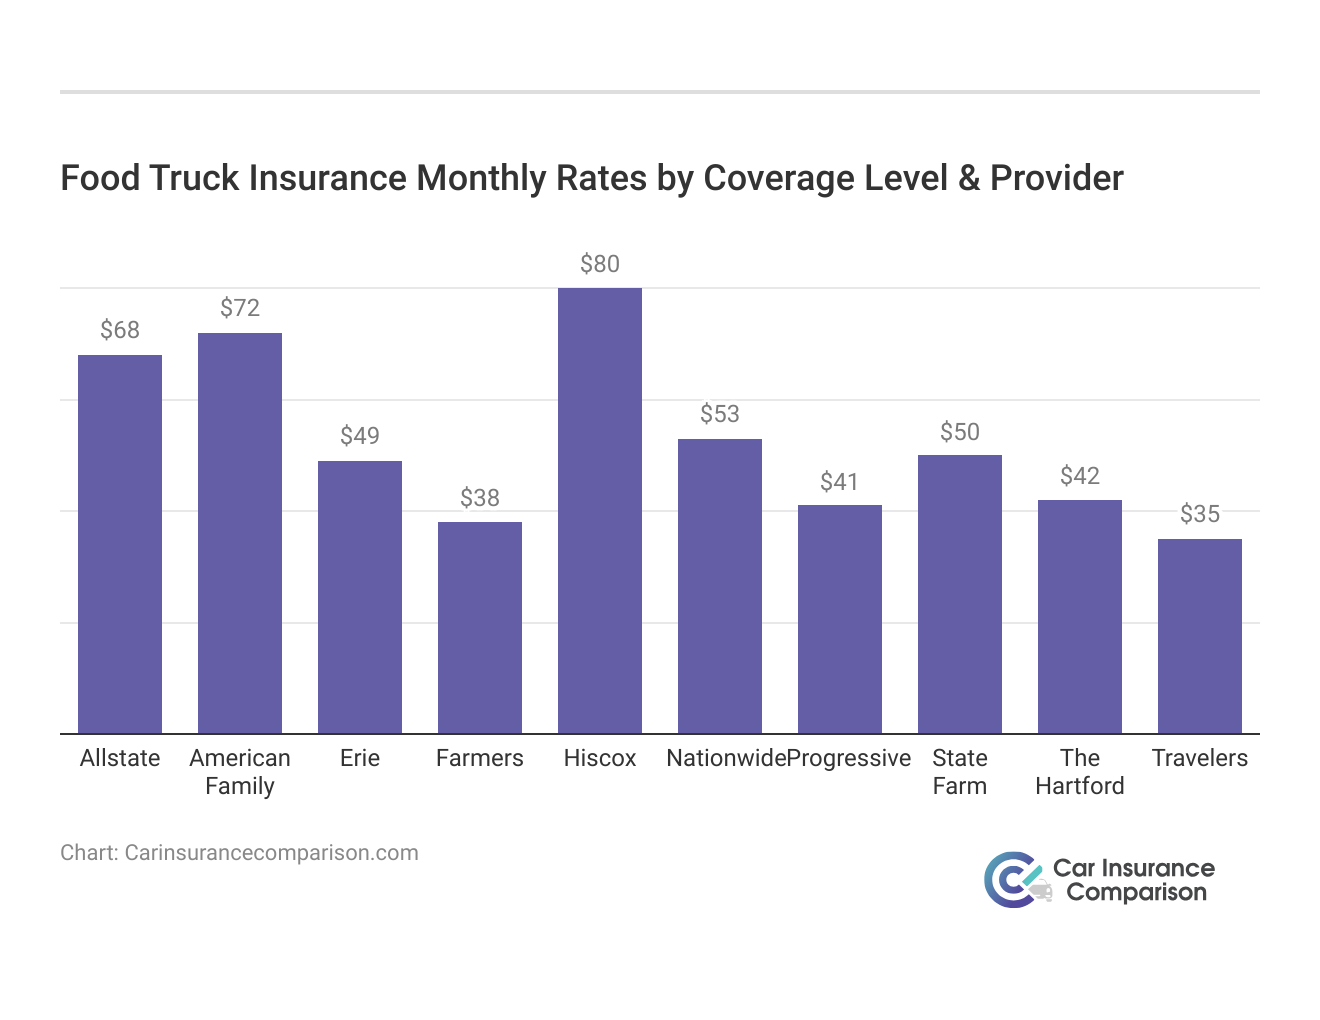 <h3>Food Truck Insurance Monthly Rates by Coverage Level & Provider</h3>